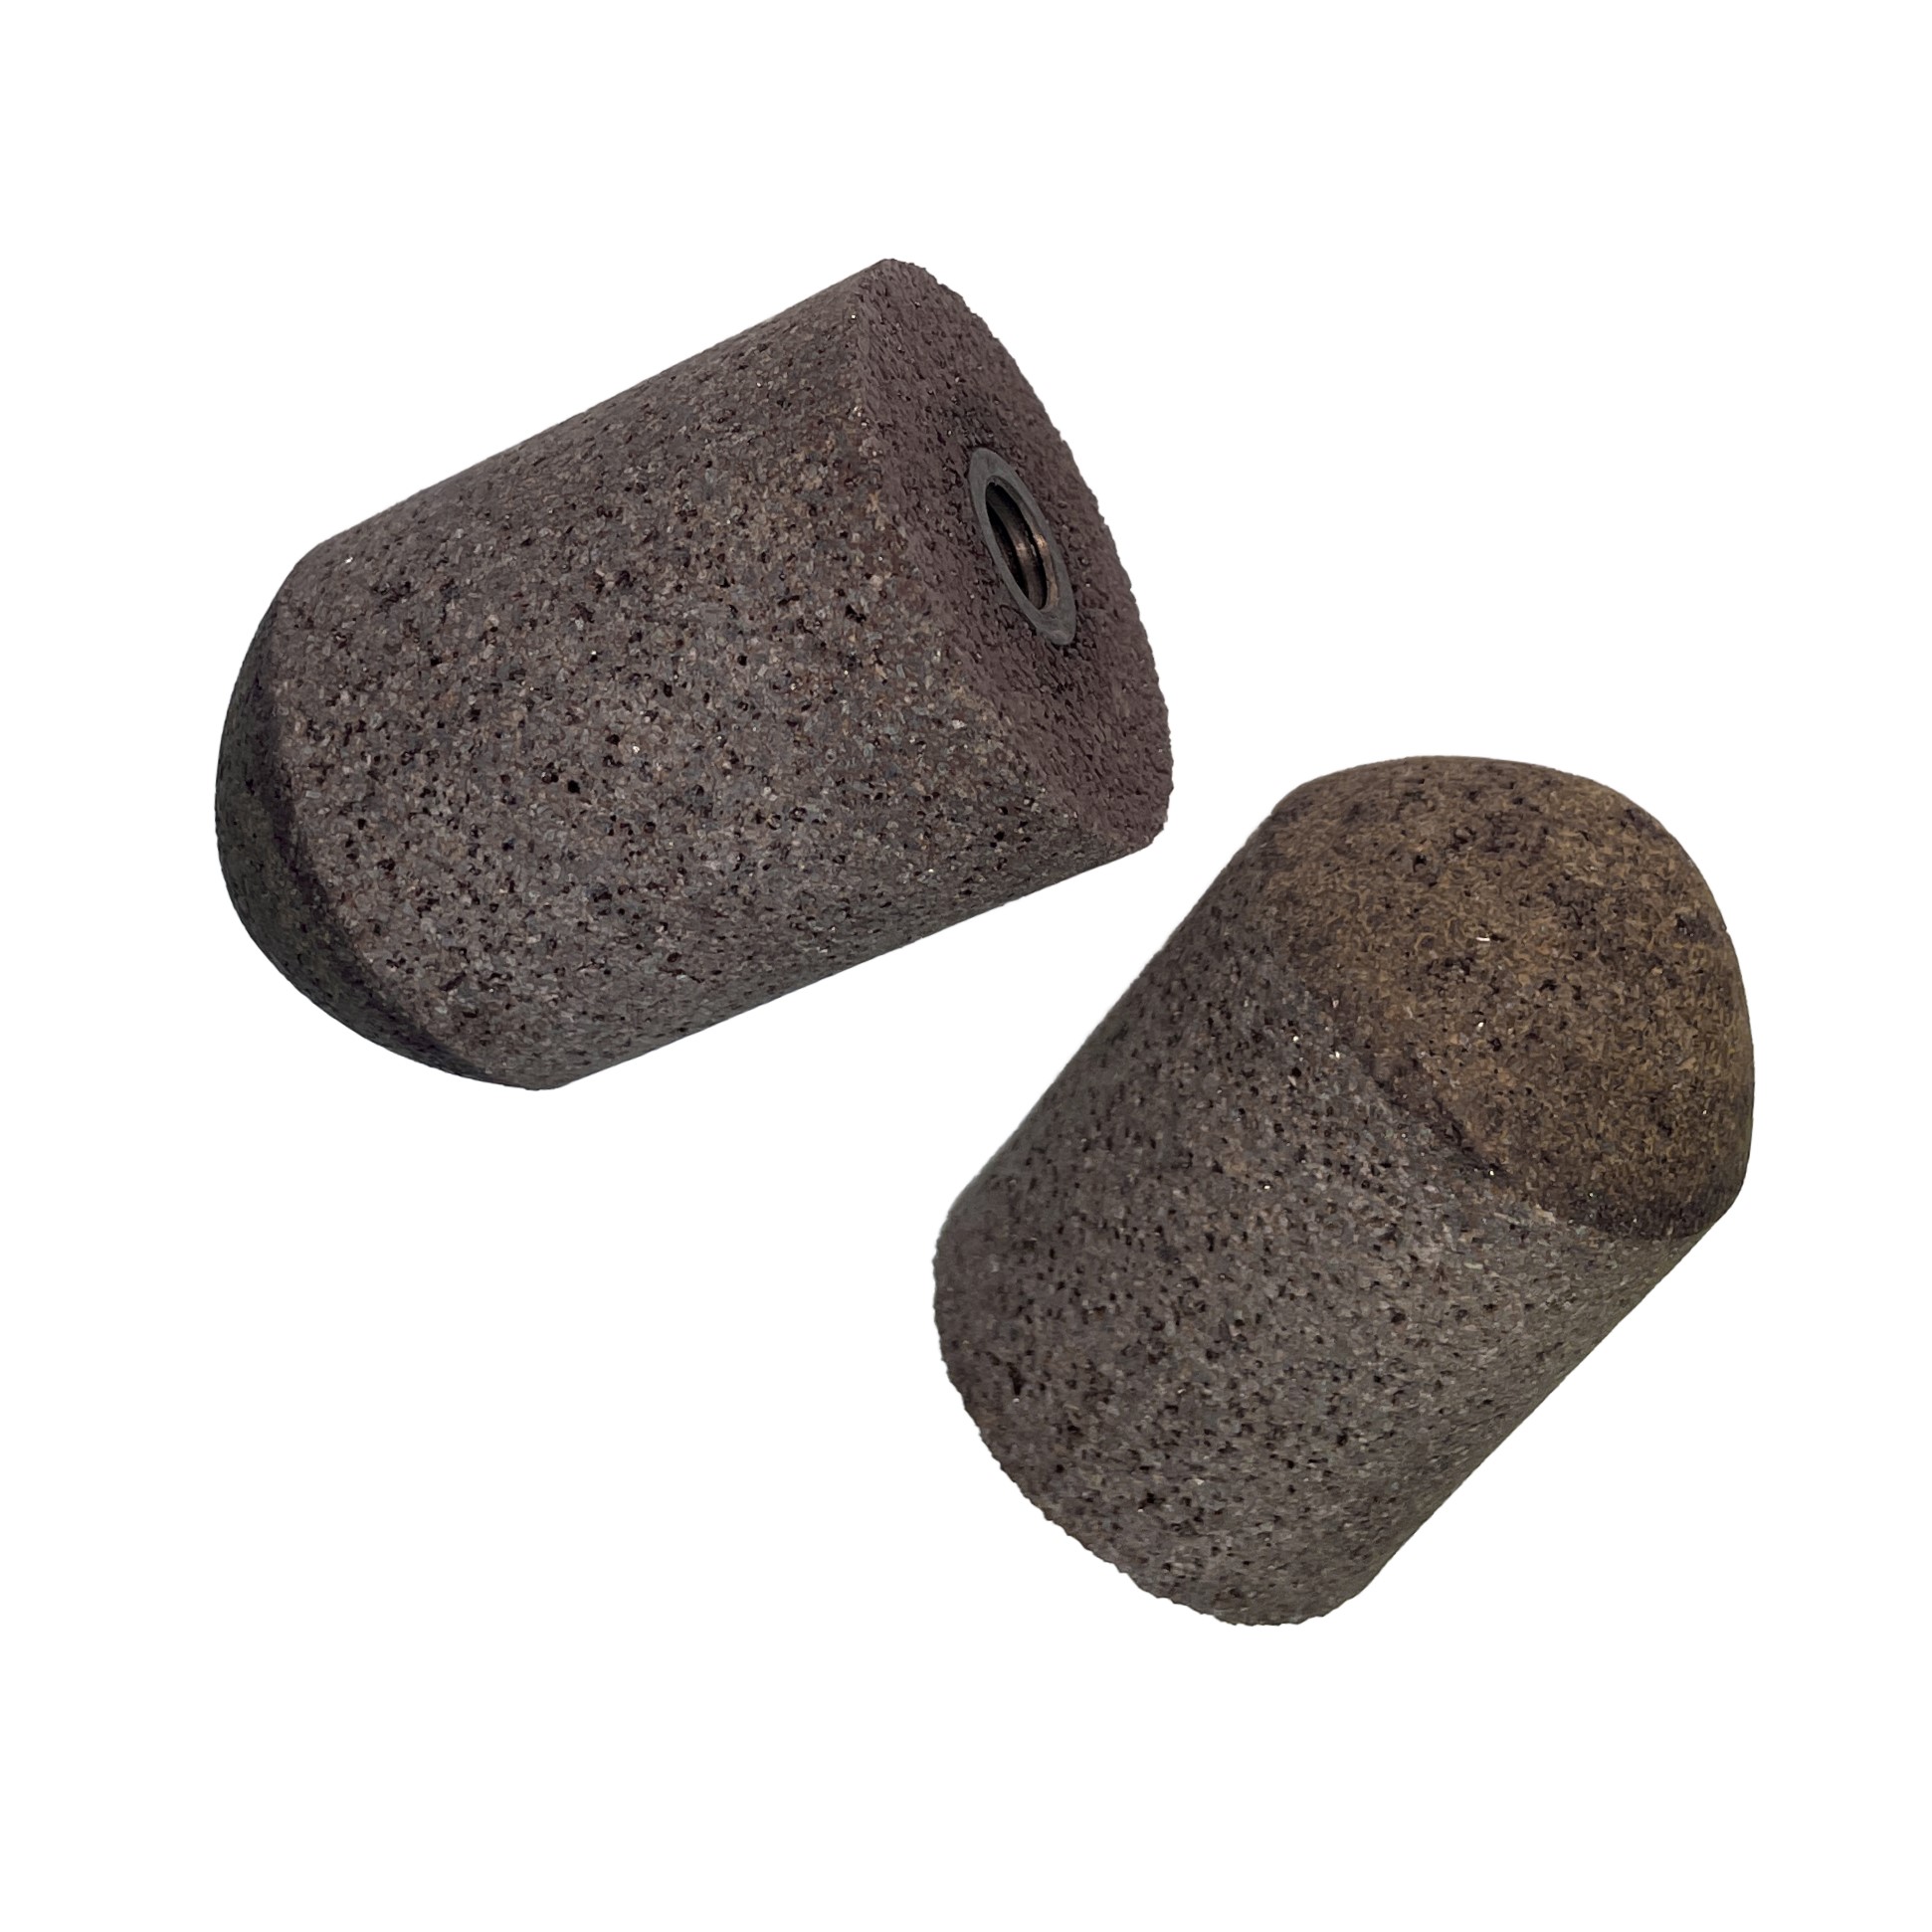 Cone and Plug Grinding Wheels